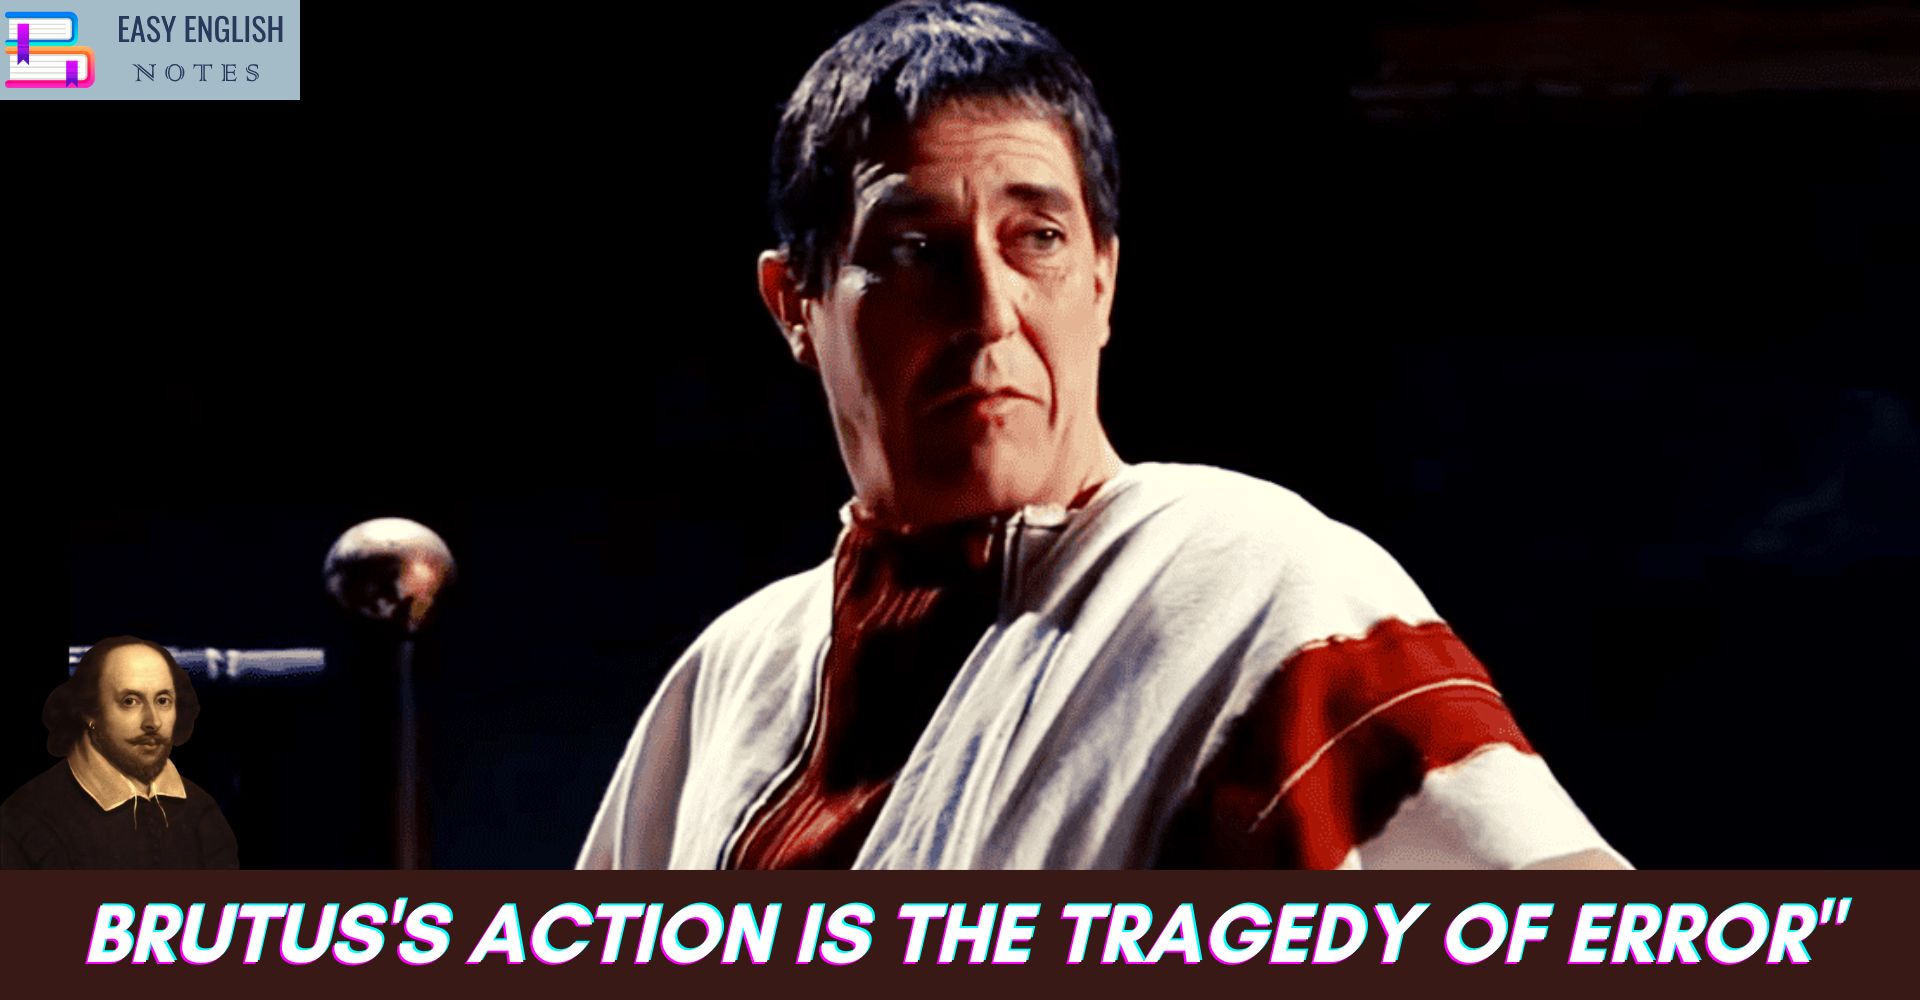 Brutus's action is the tragedy of Error